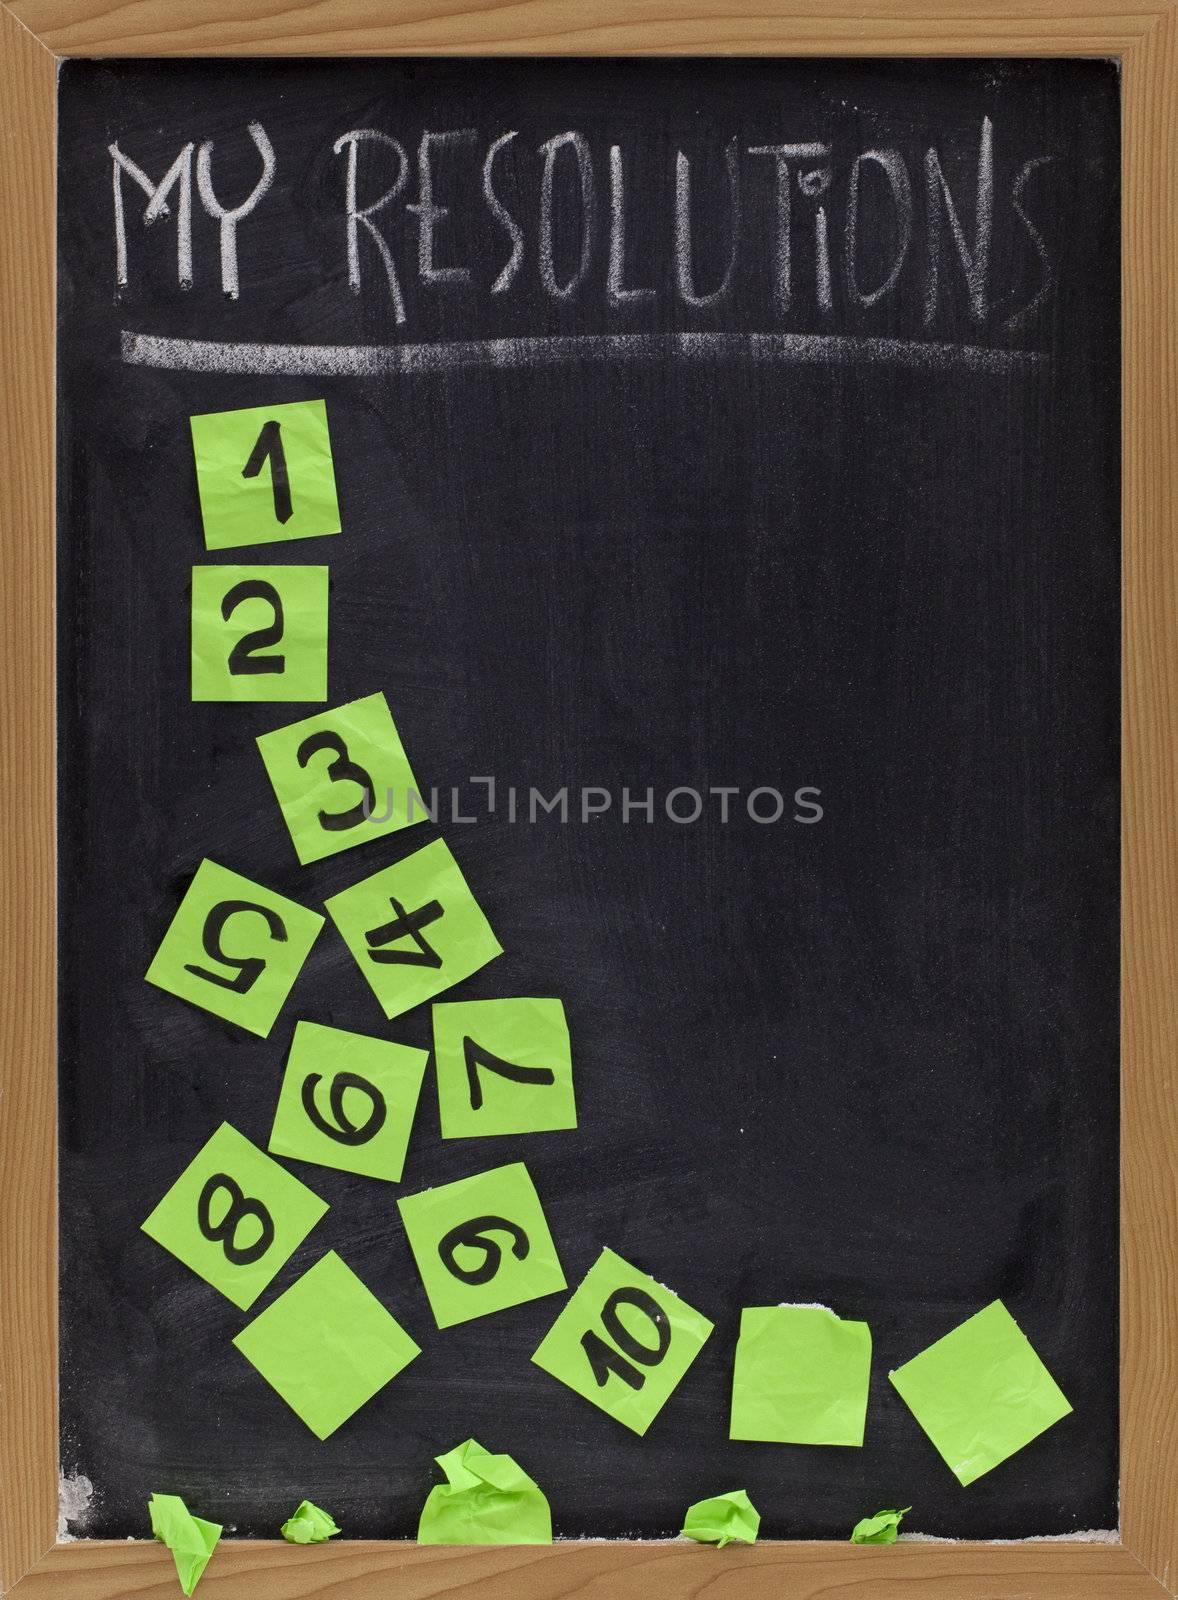 fading new year resolutions by PixelsAway